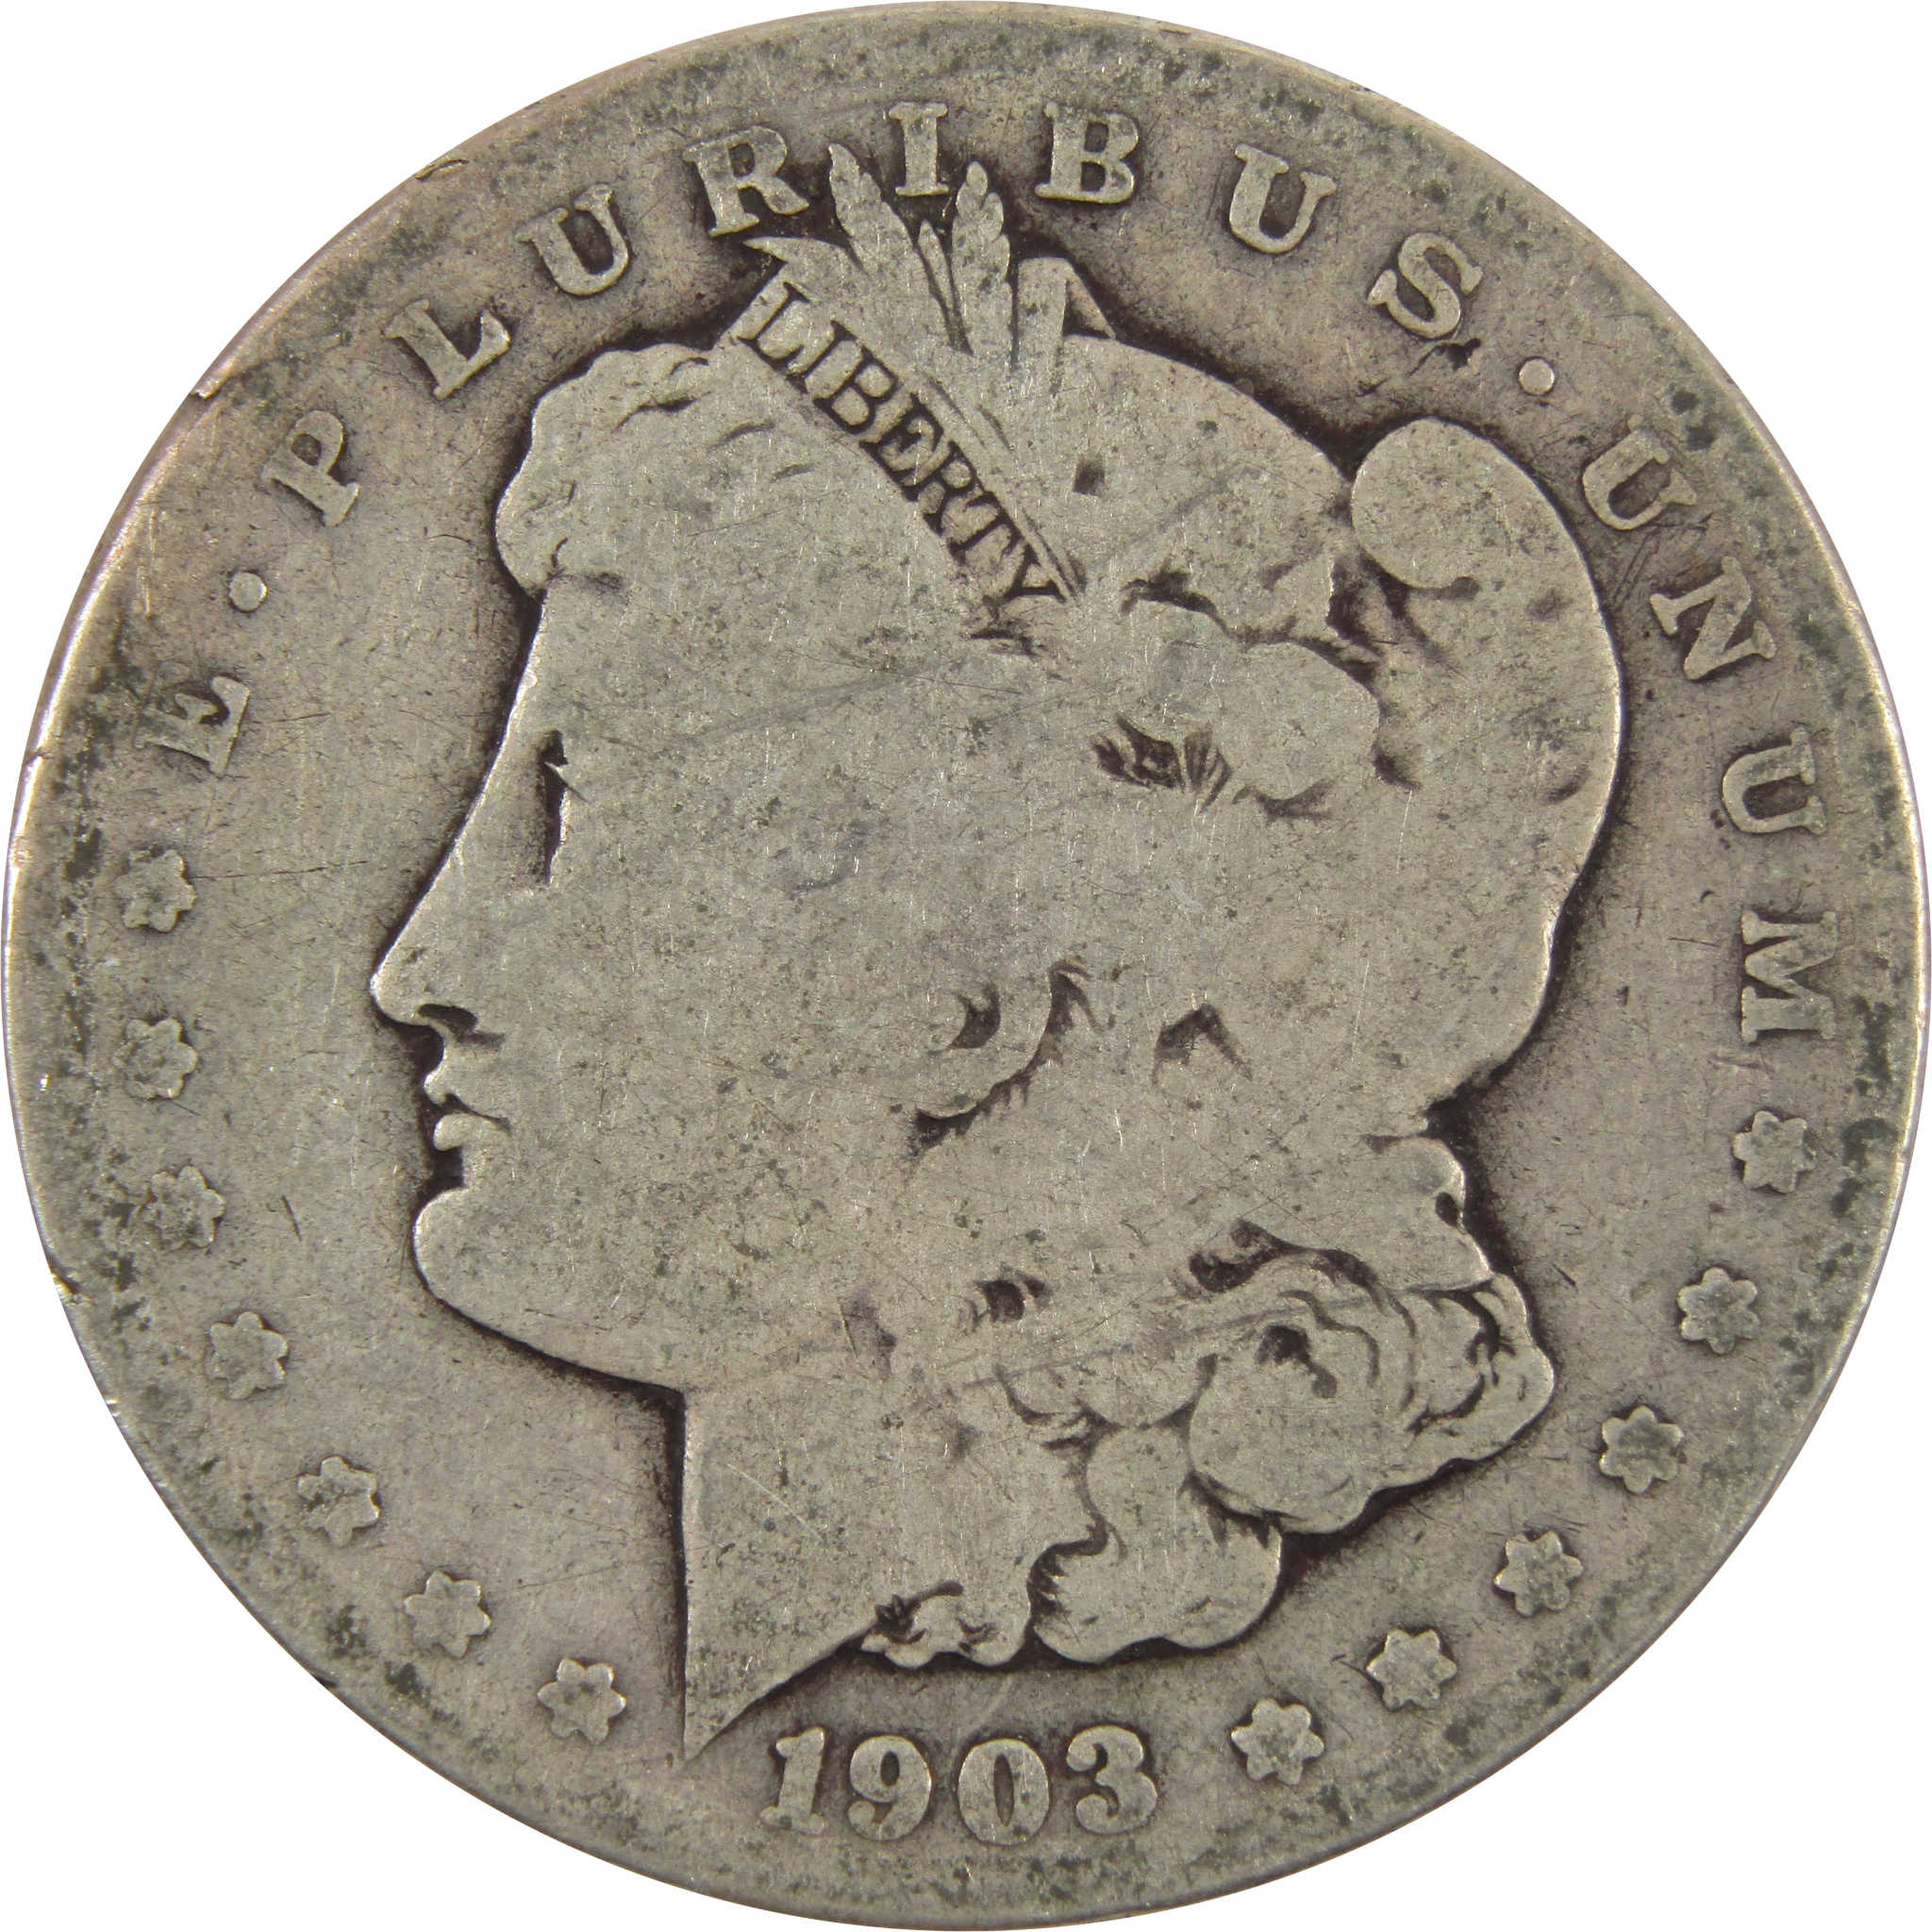 1903 S Morgan Dollar AG About Good 90% Silver $1 Coin SKU:I7568 - Morgan coin - Morgan silver dollar - Morgan silver dollar for sale - Profile Coins &amp; Collectibles